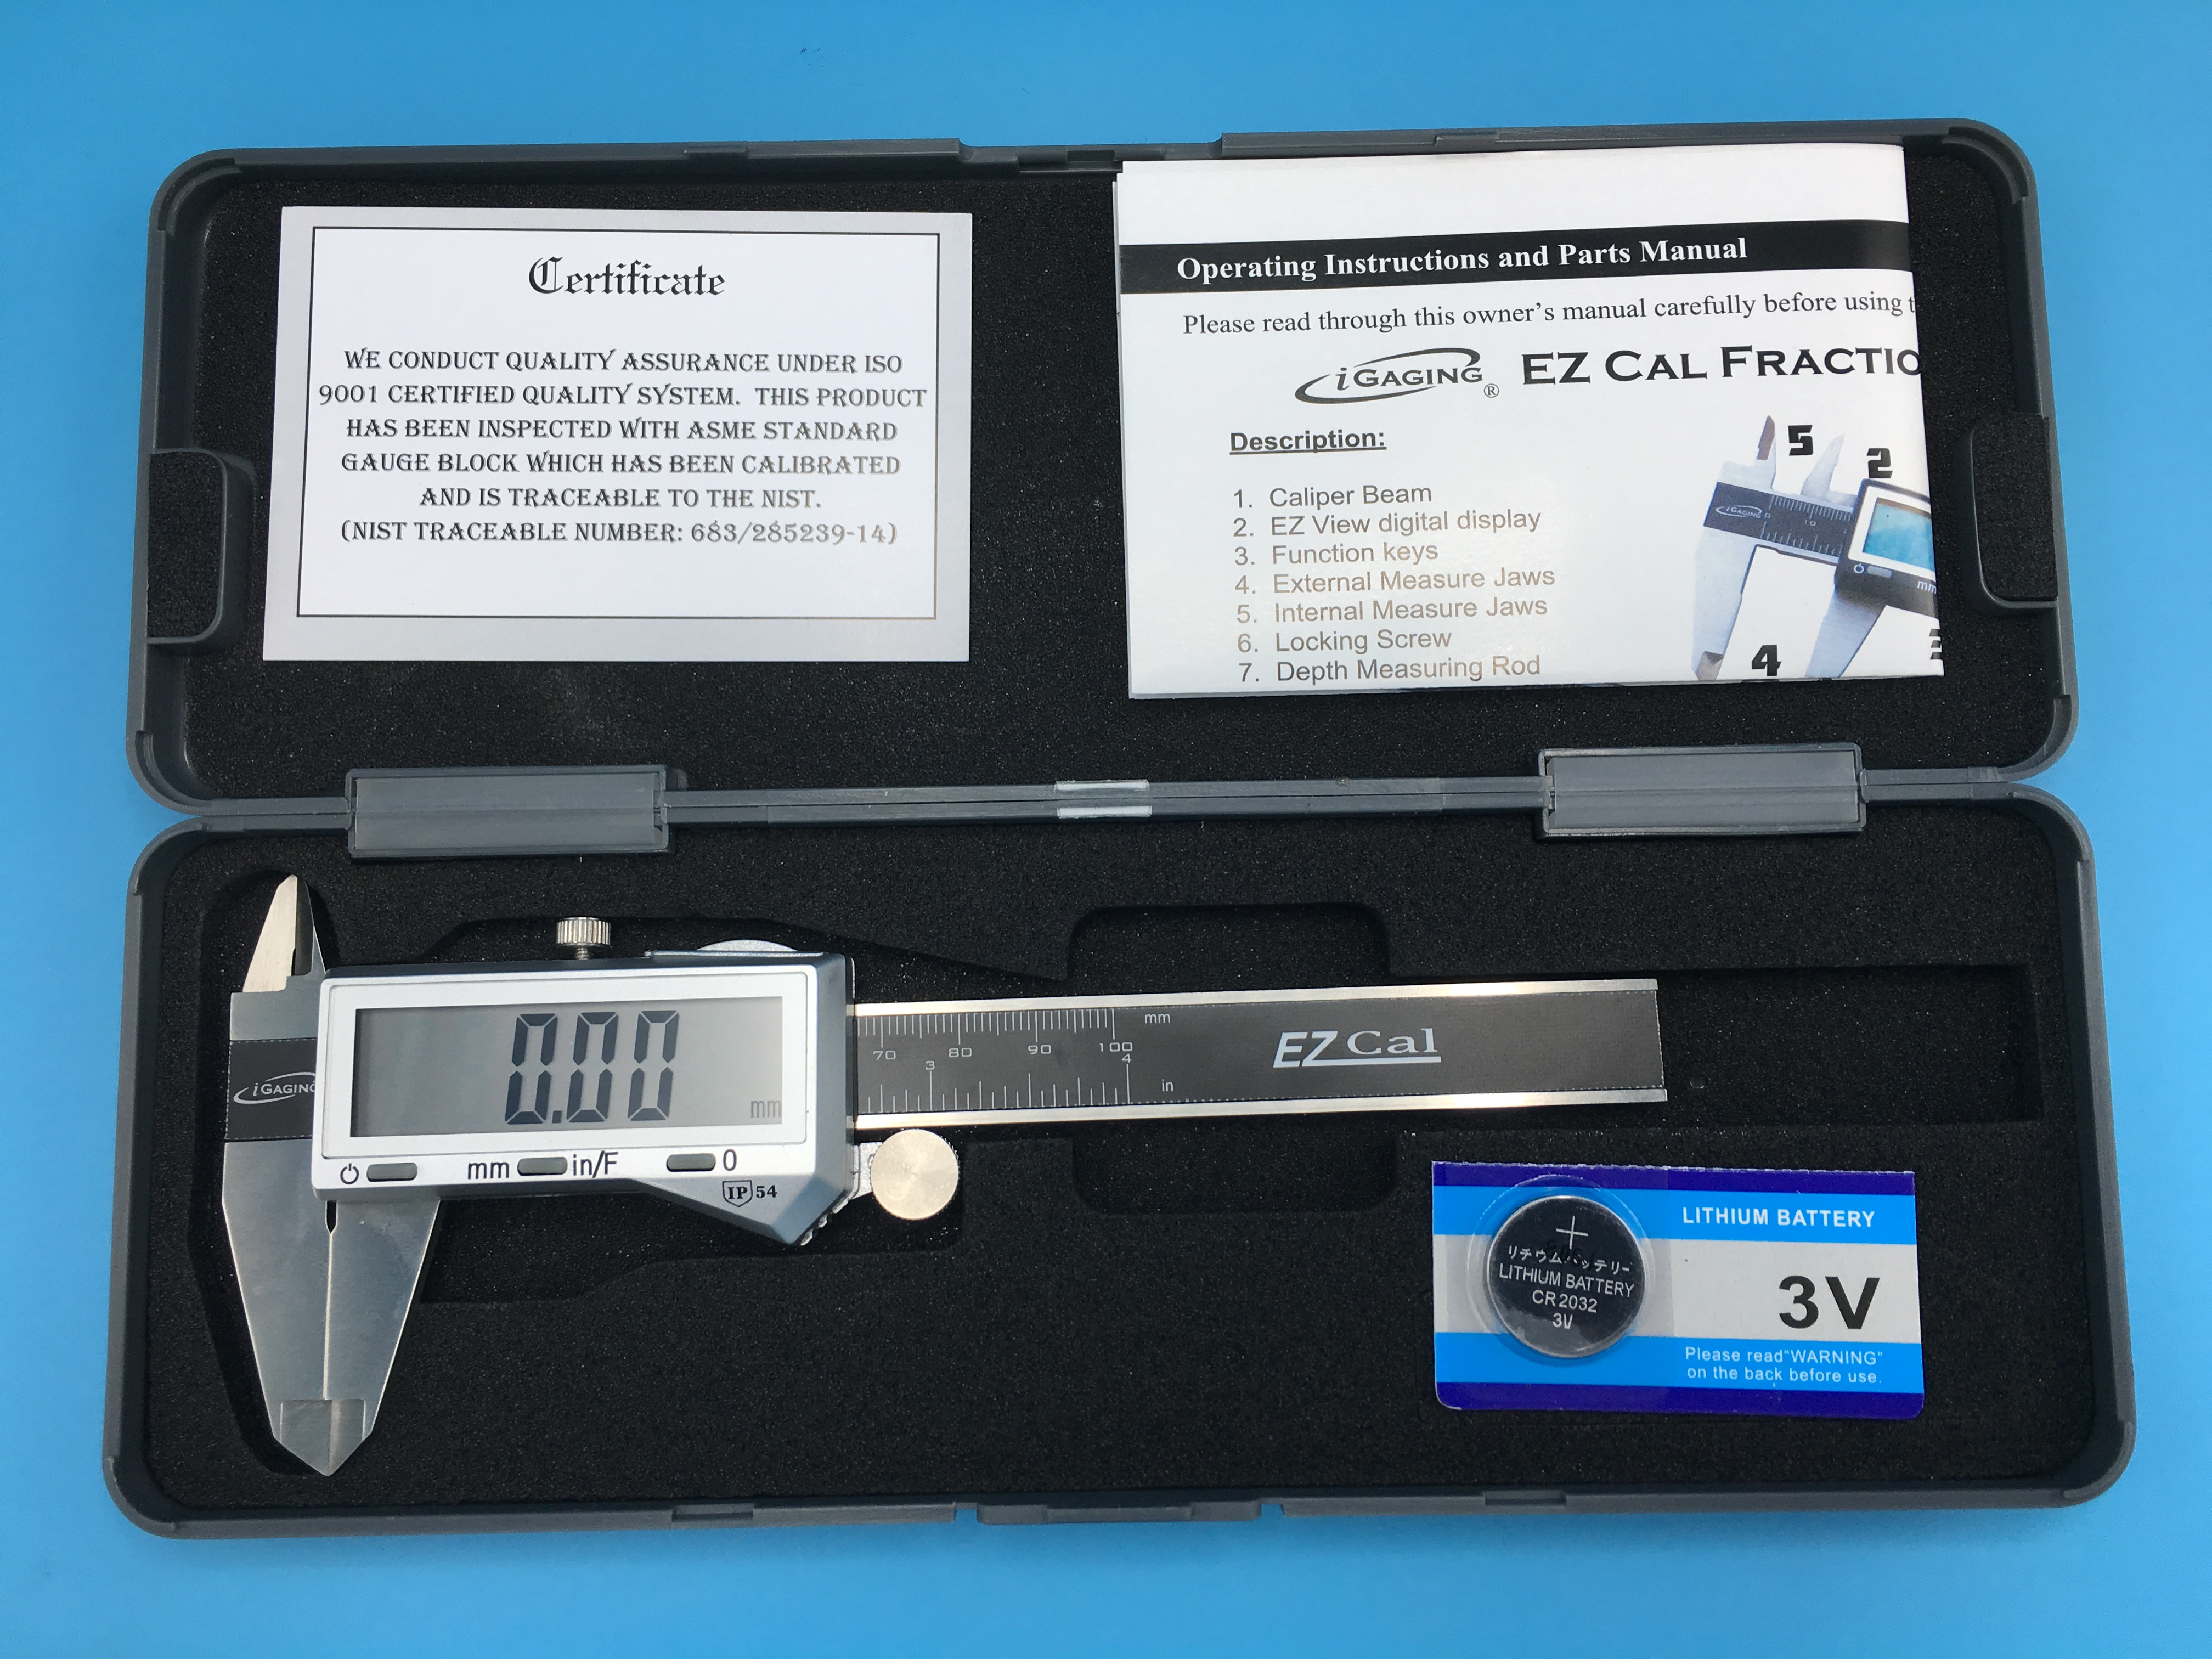 4,6,8, or 12 Inch Digital Electronic Calipers 0.0005" Inch Metric Fractions, X-large display